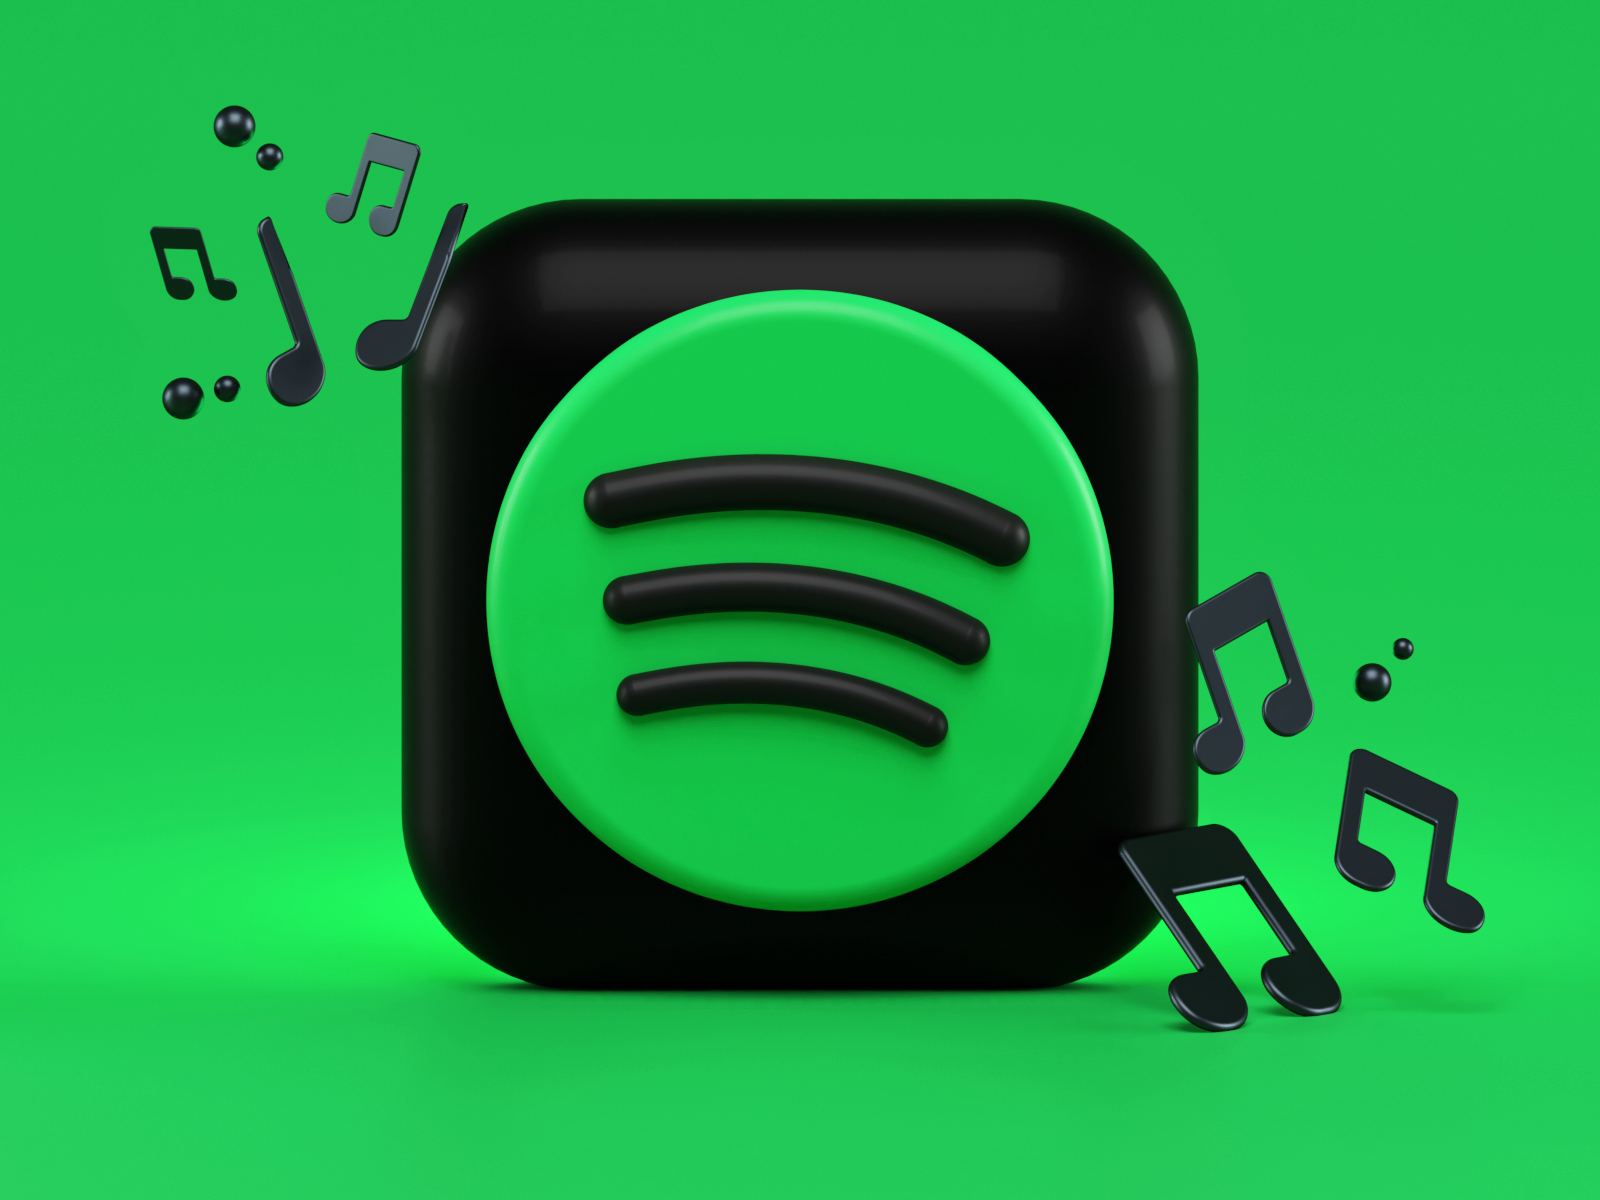 Spotify 3d Icon Concept by Alexander Shatov on Dribbble